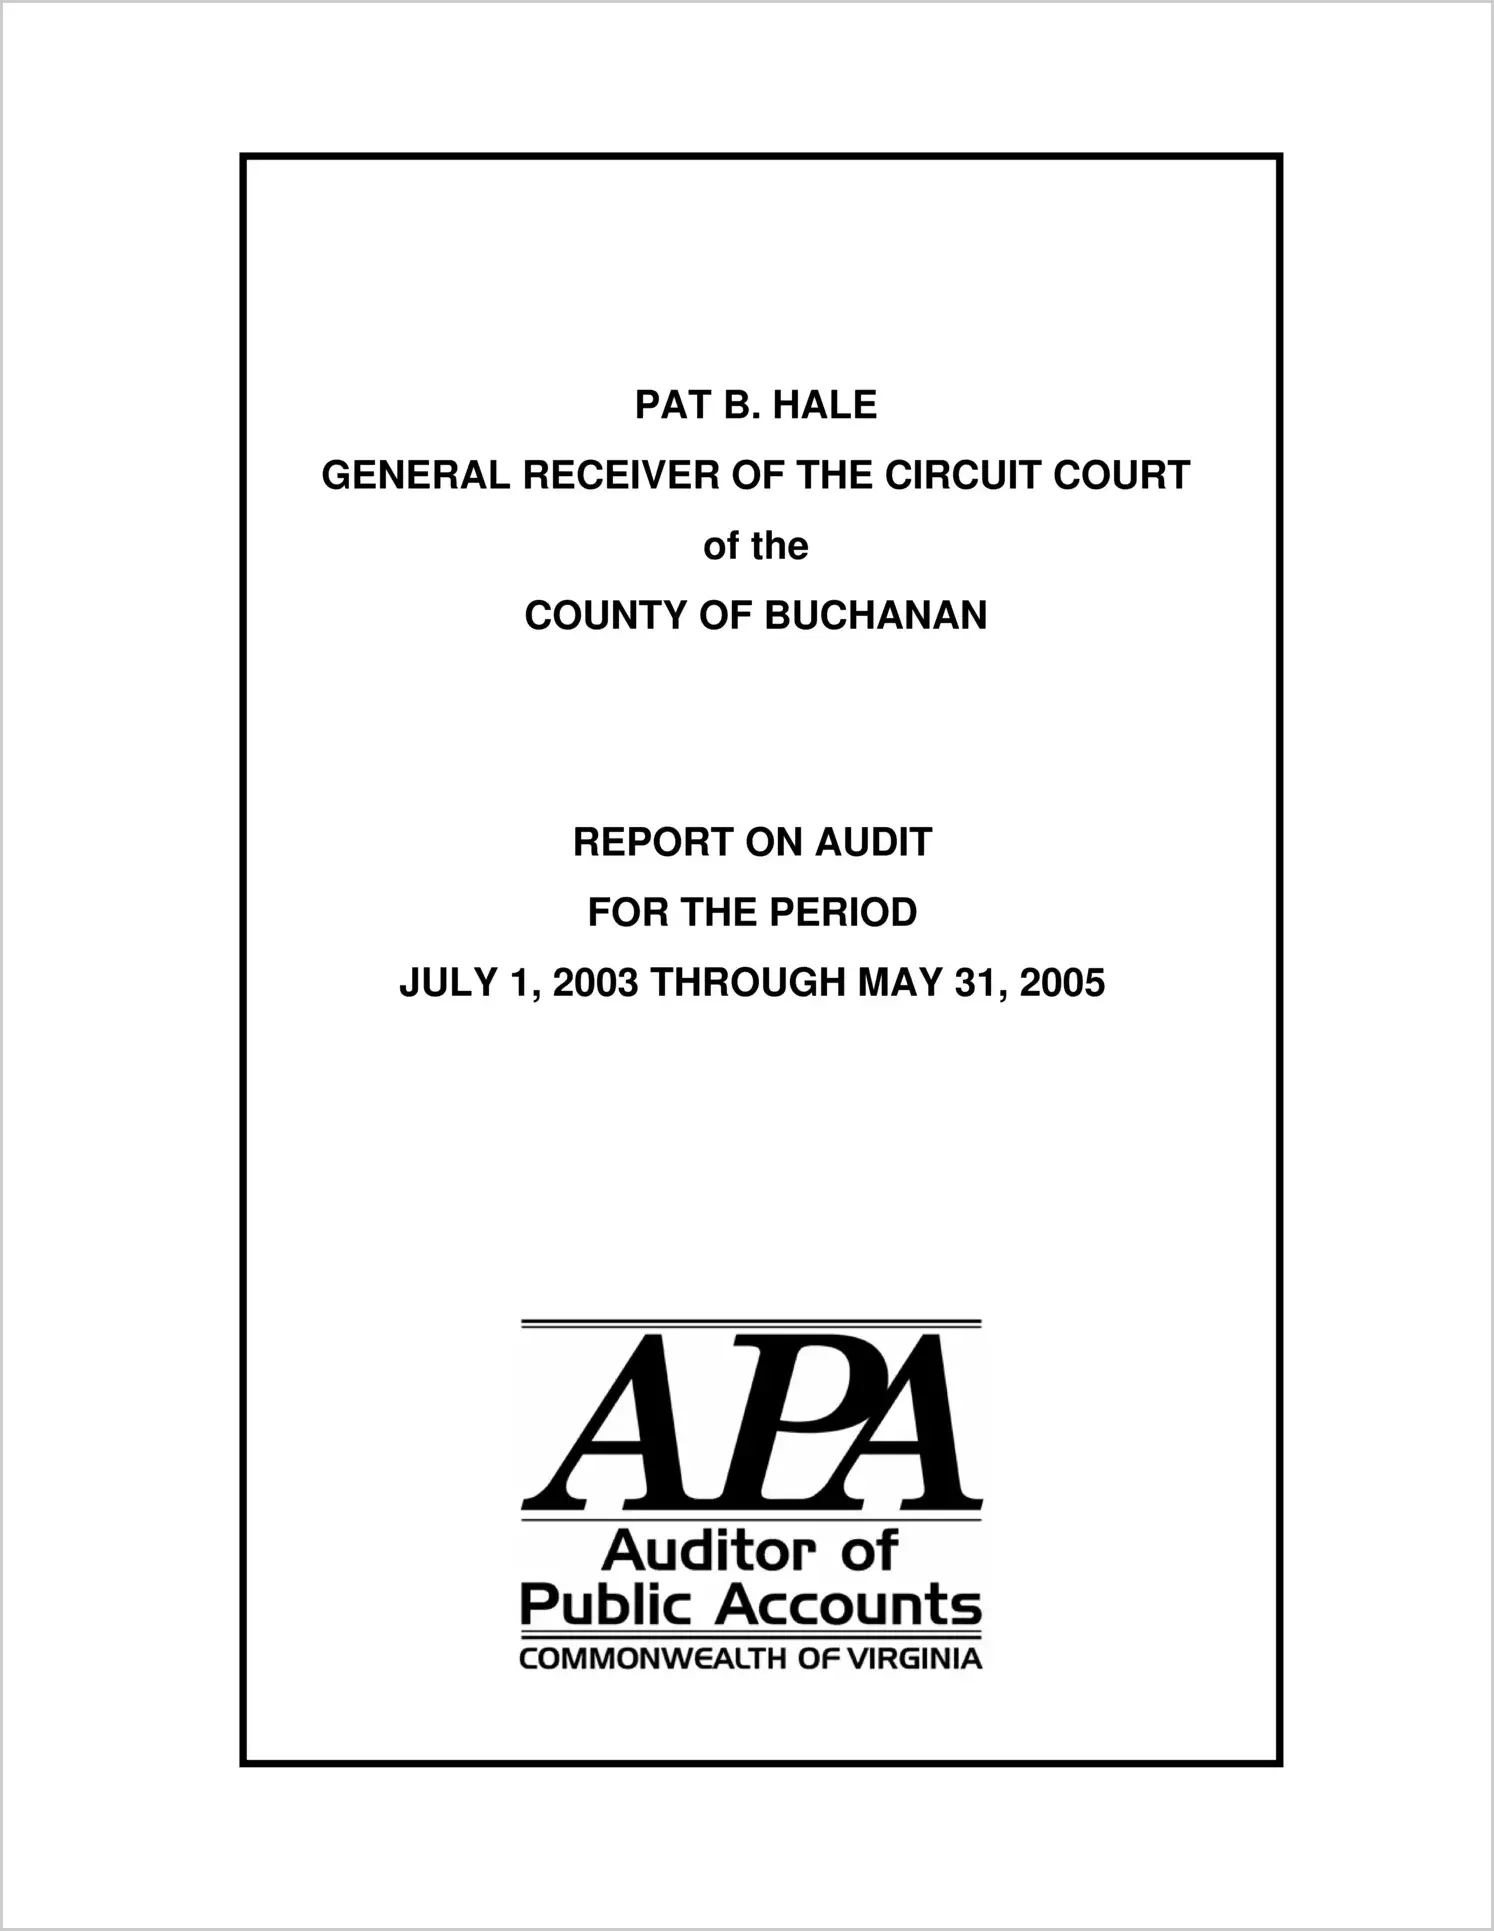 General Receiver of the Circuit Court of the County of Buchanan for the period July 1, 2003 through May 31, 2005